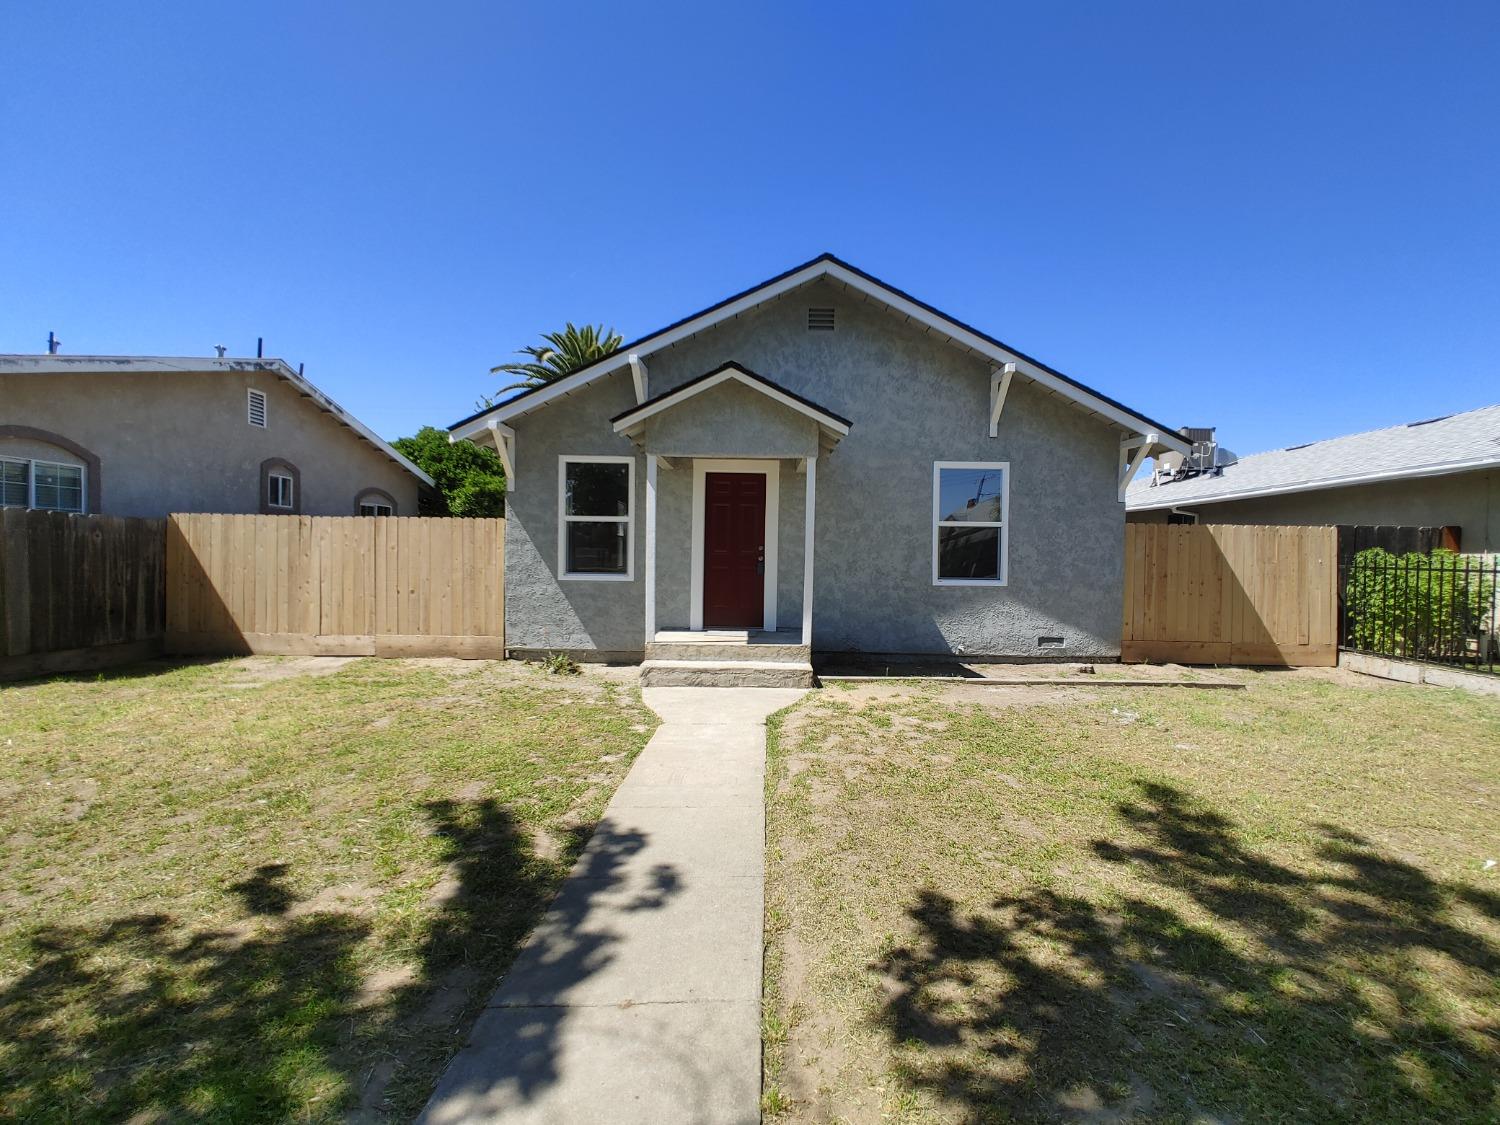 Photo of 951 D St in Reedley, CA